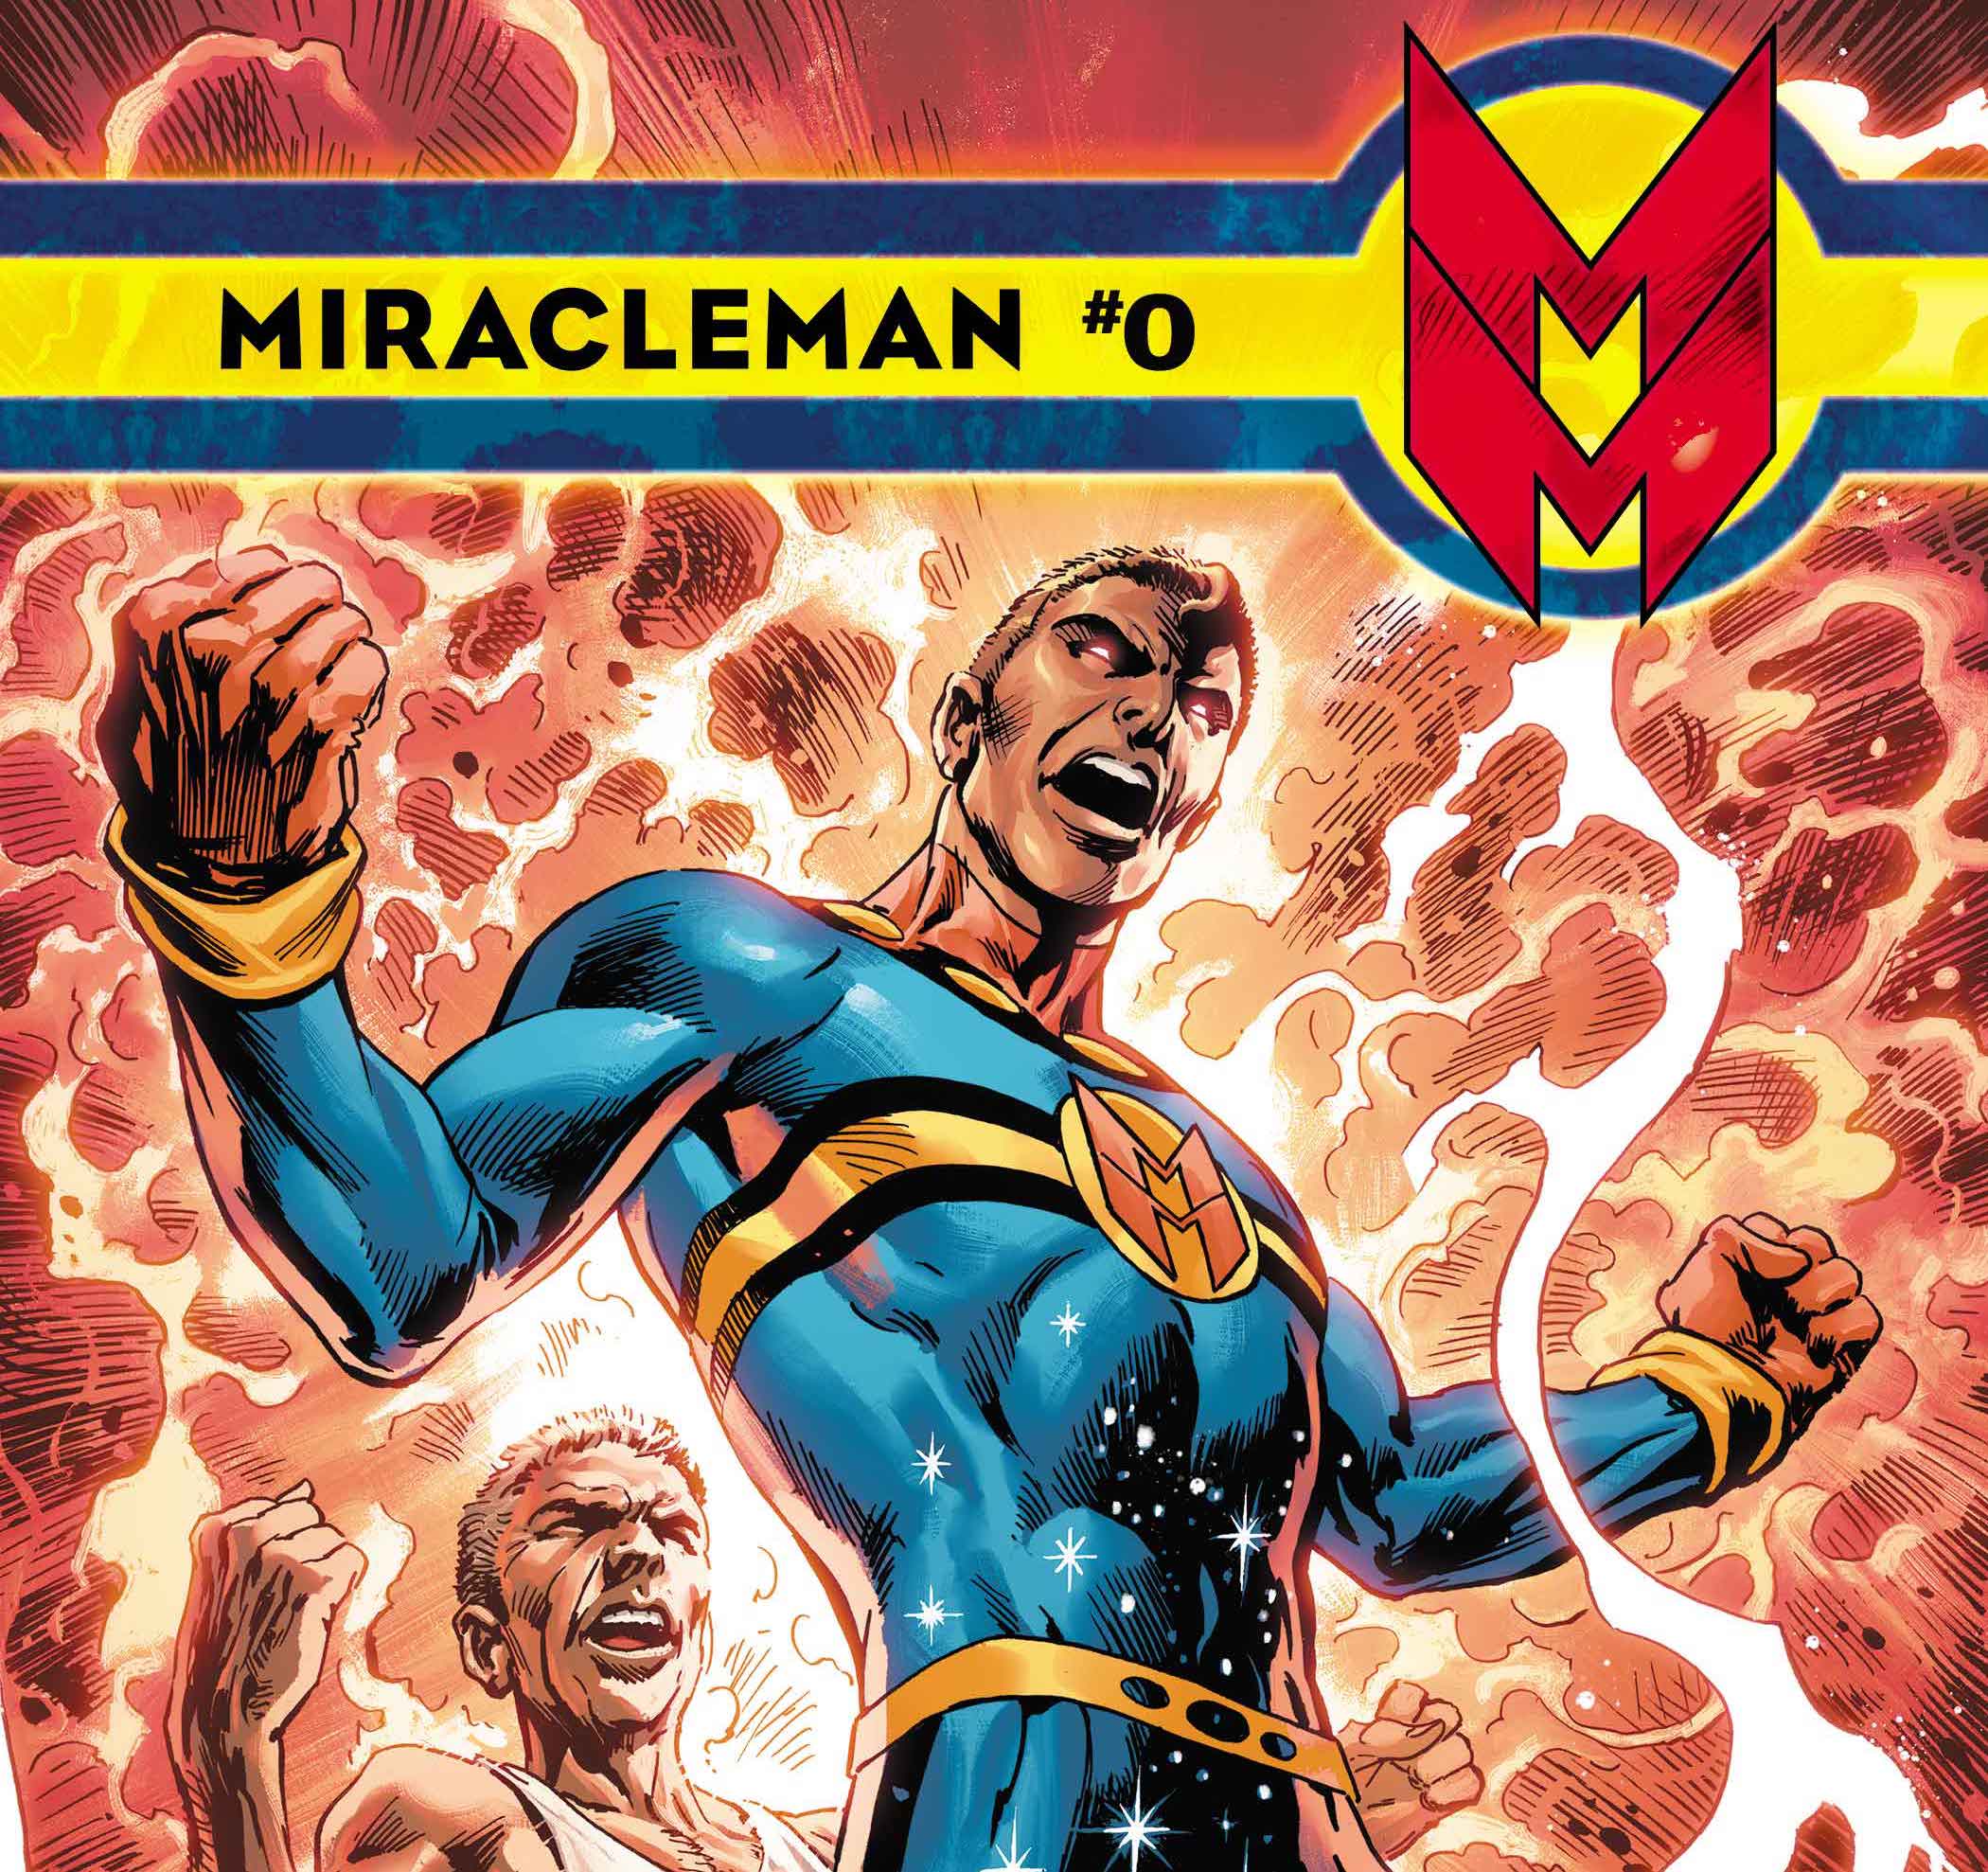 Marvel goes big with 'Miracleman' #0 giant-sized one-shot